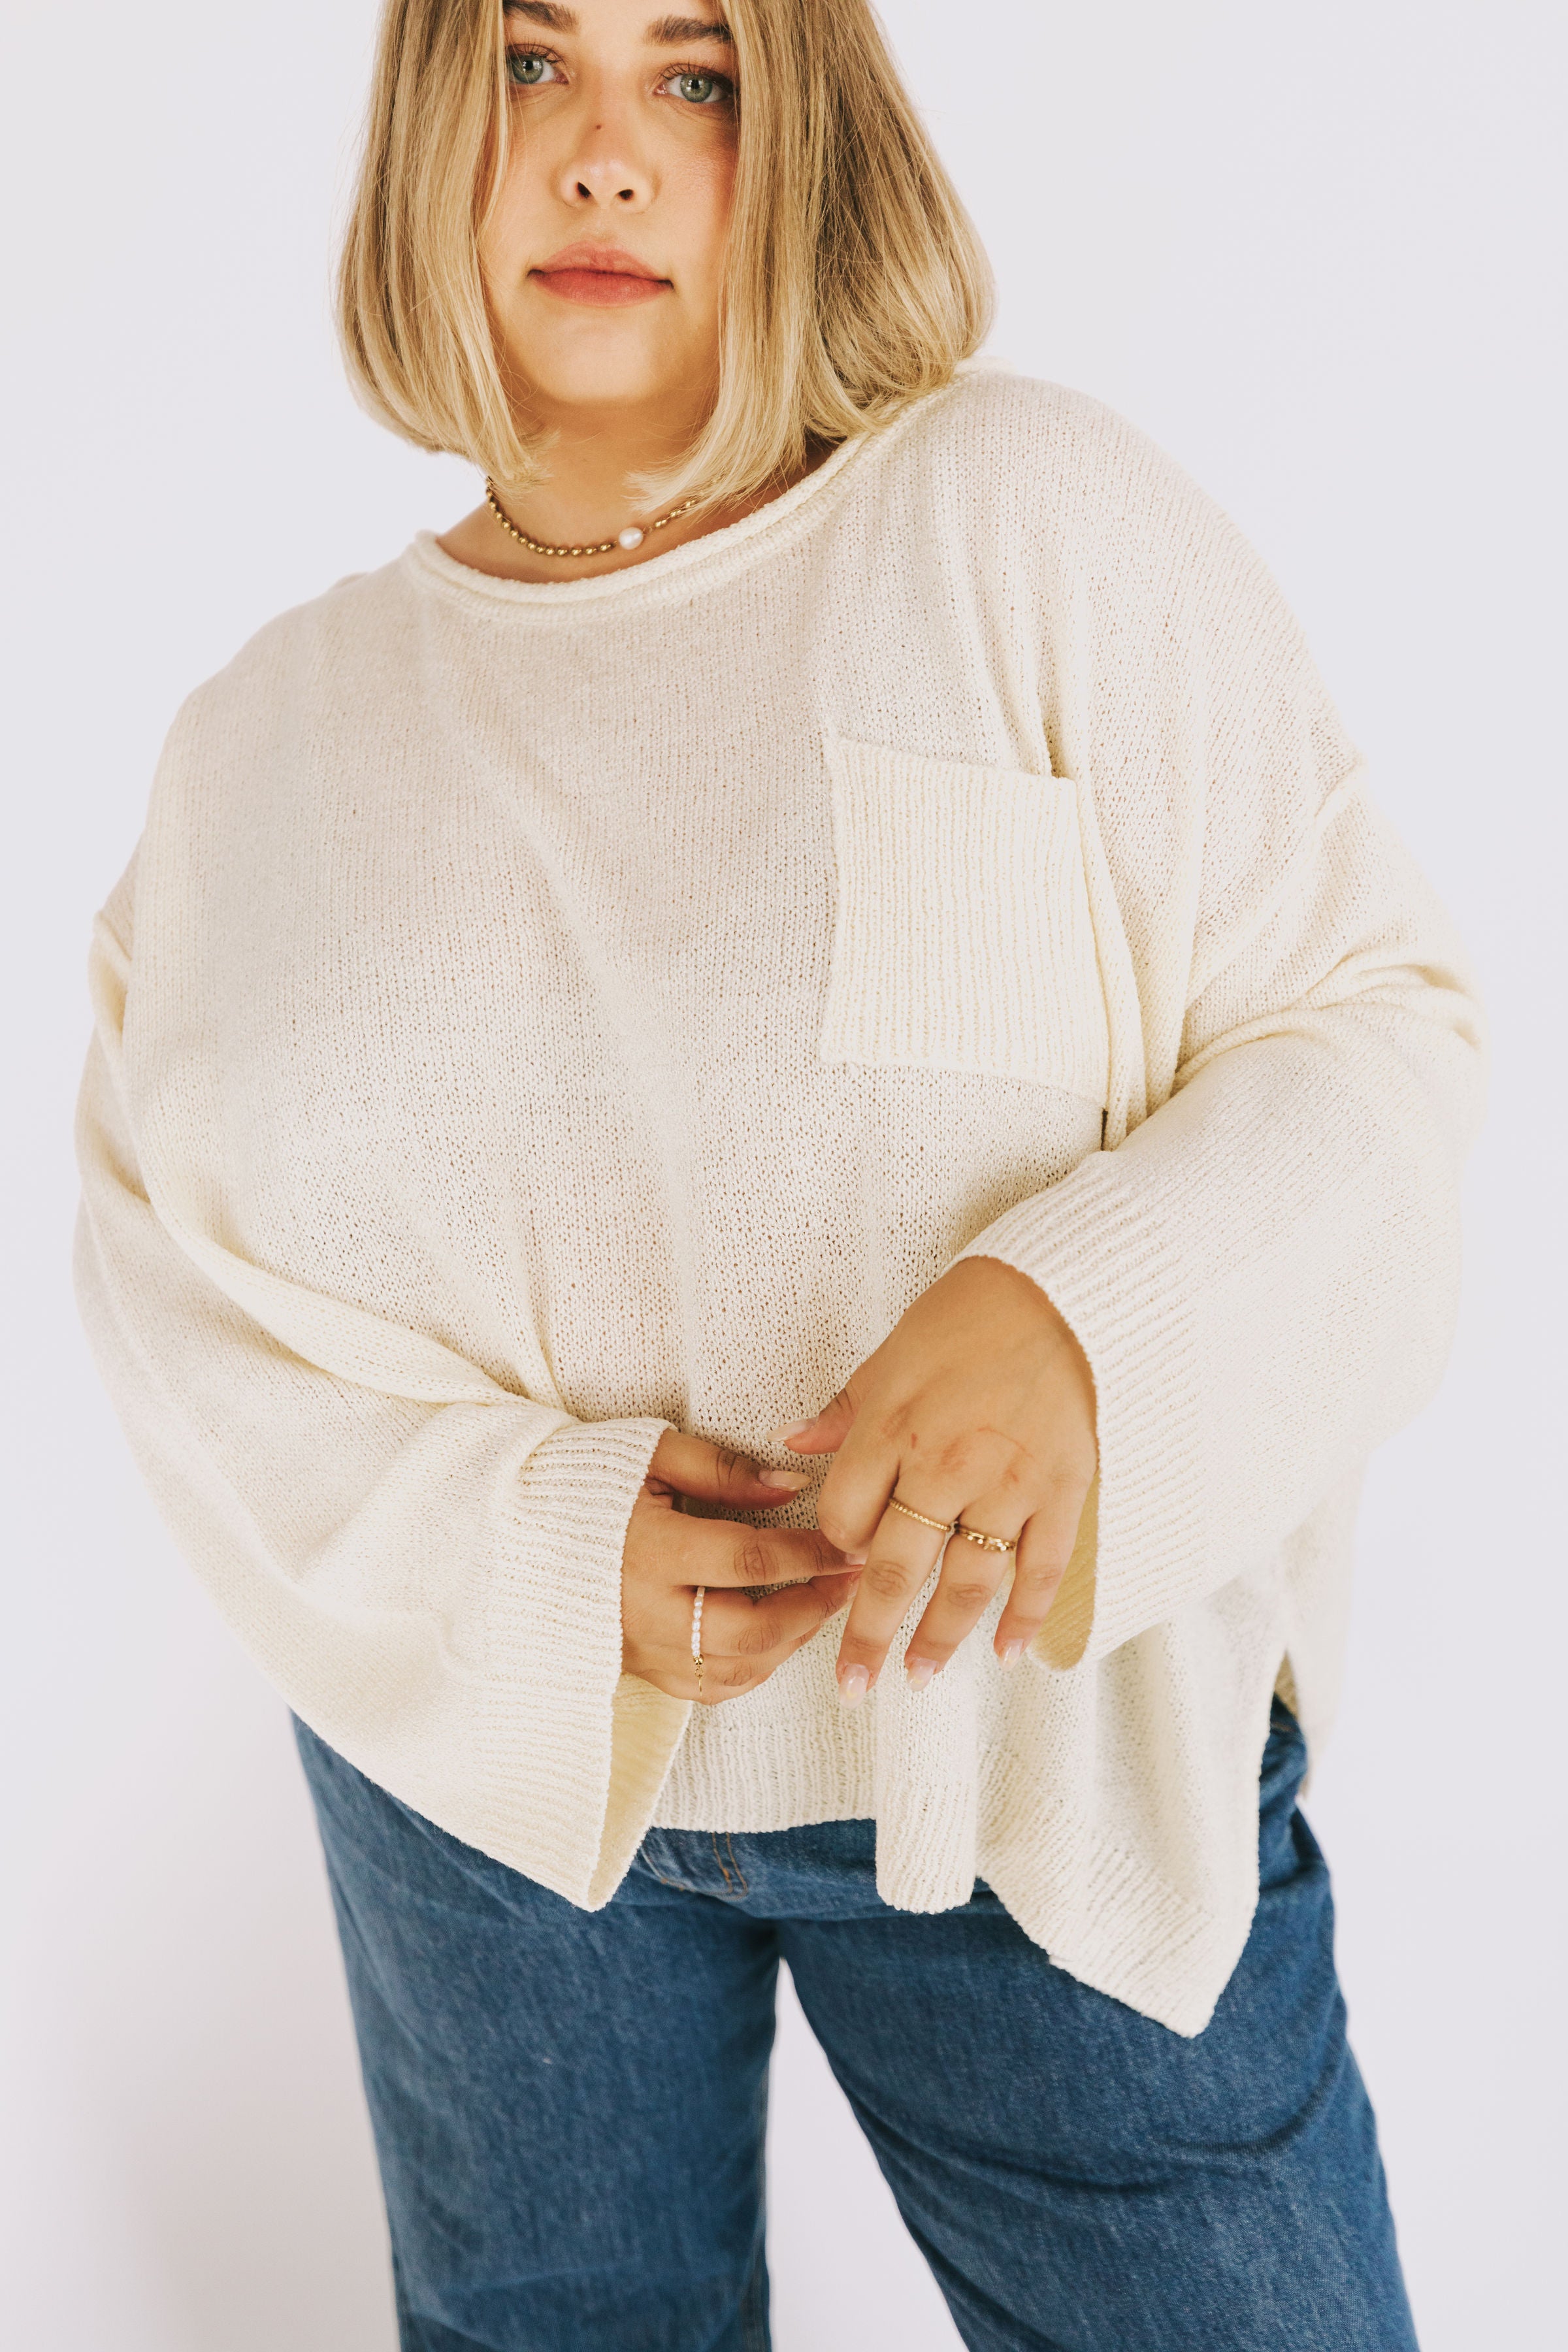 PLUS SIZE - Anything For You Sweater